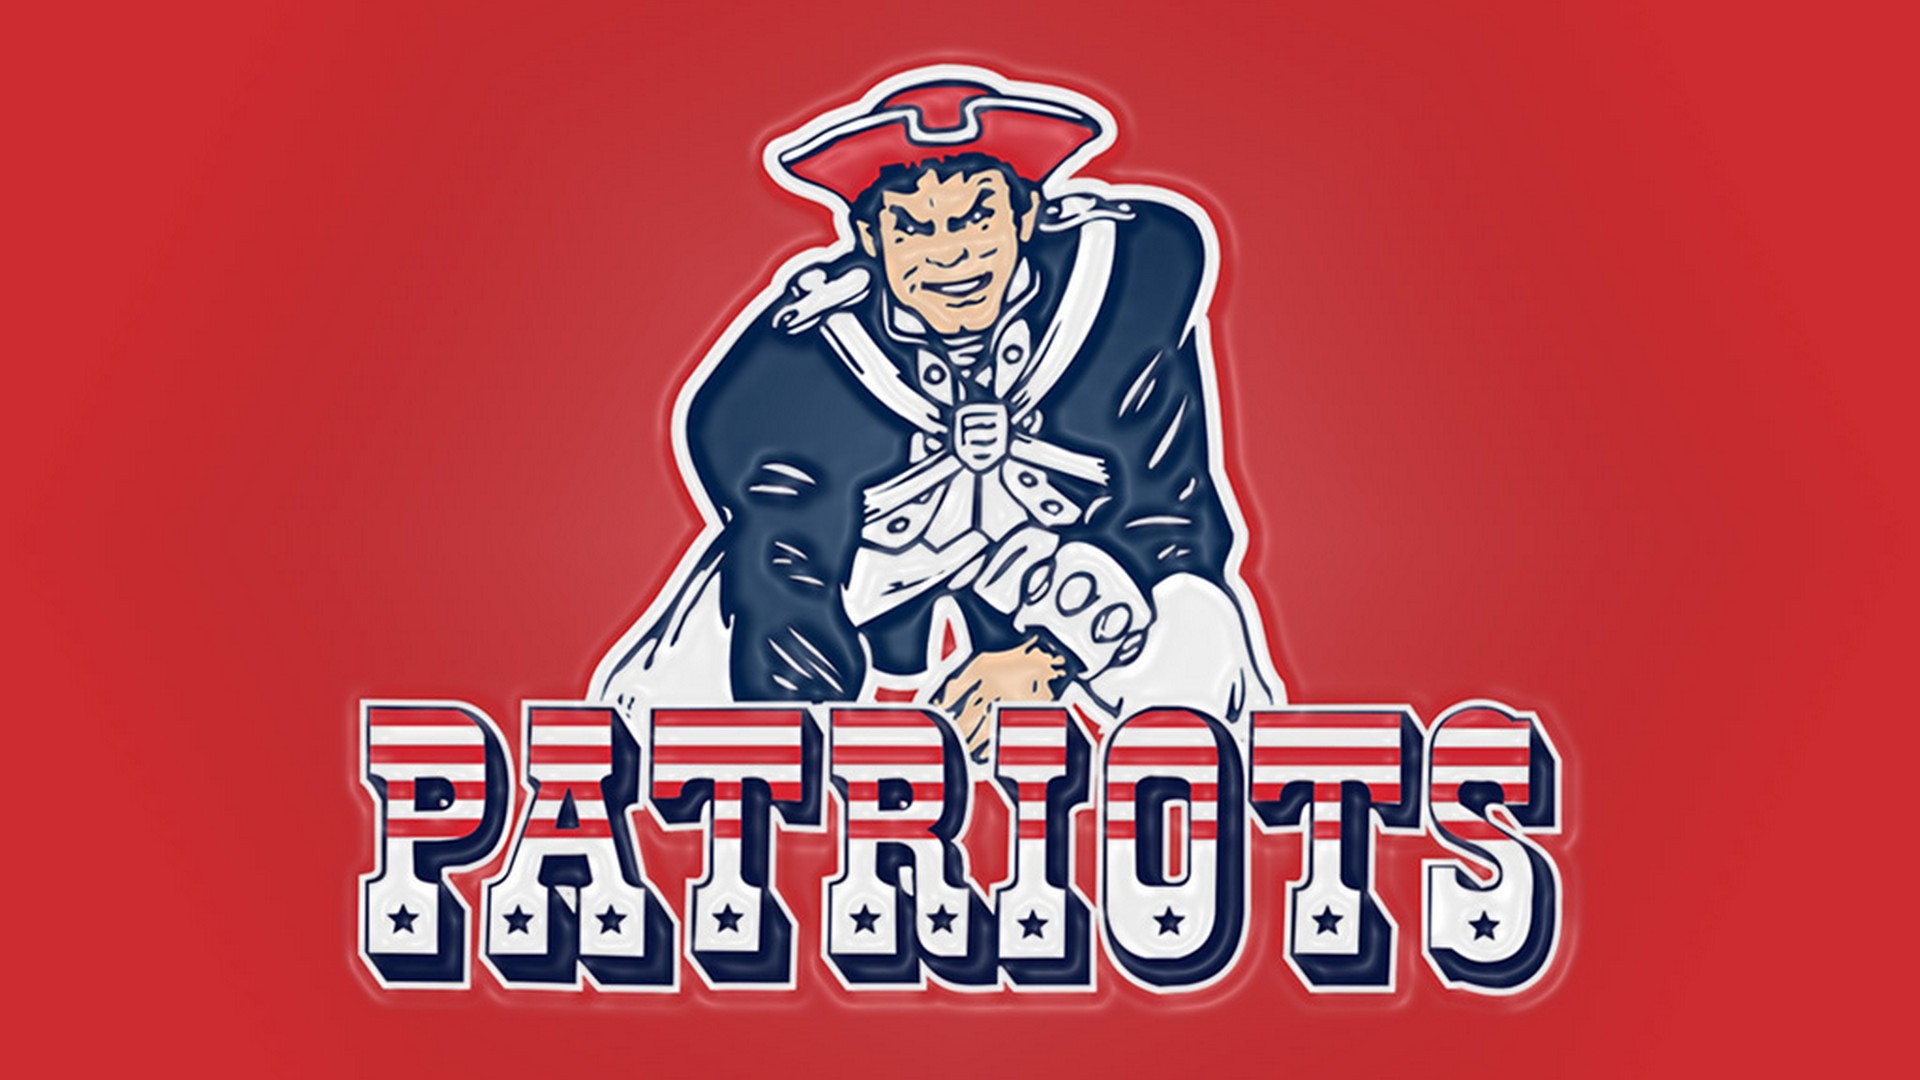 Wallpaper Desktop Patriots HD with resolution 1920x1080 pixel. You can make this wallpaper for your Mac or Windows Desktop Background, iPhone, Android or Tablet and another Smartphone device